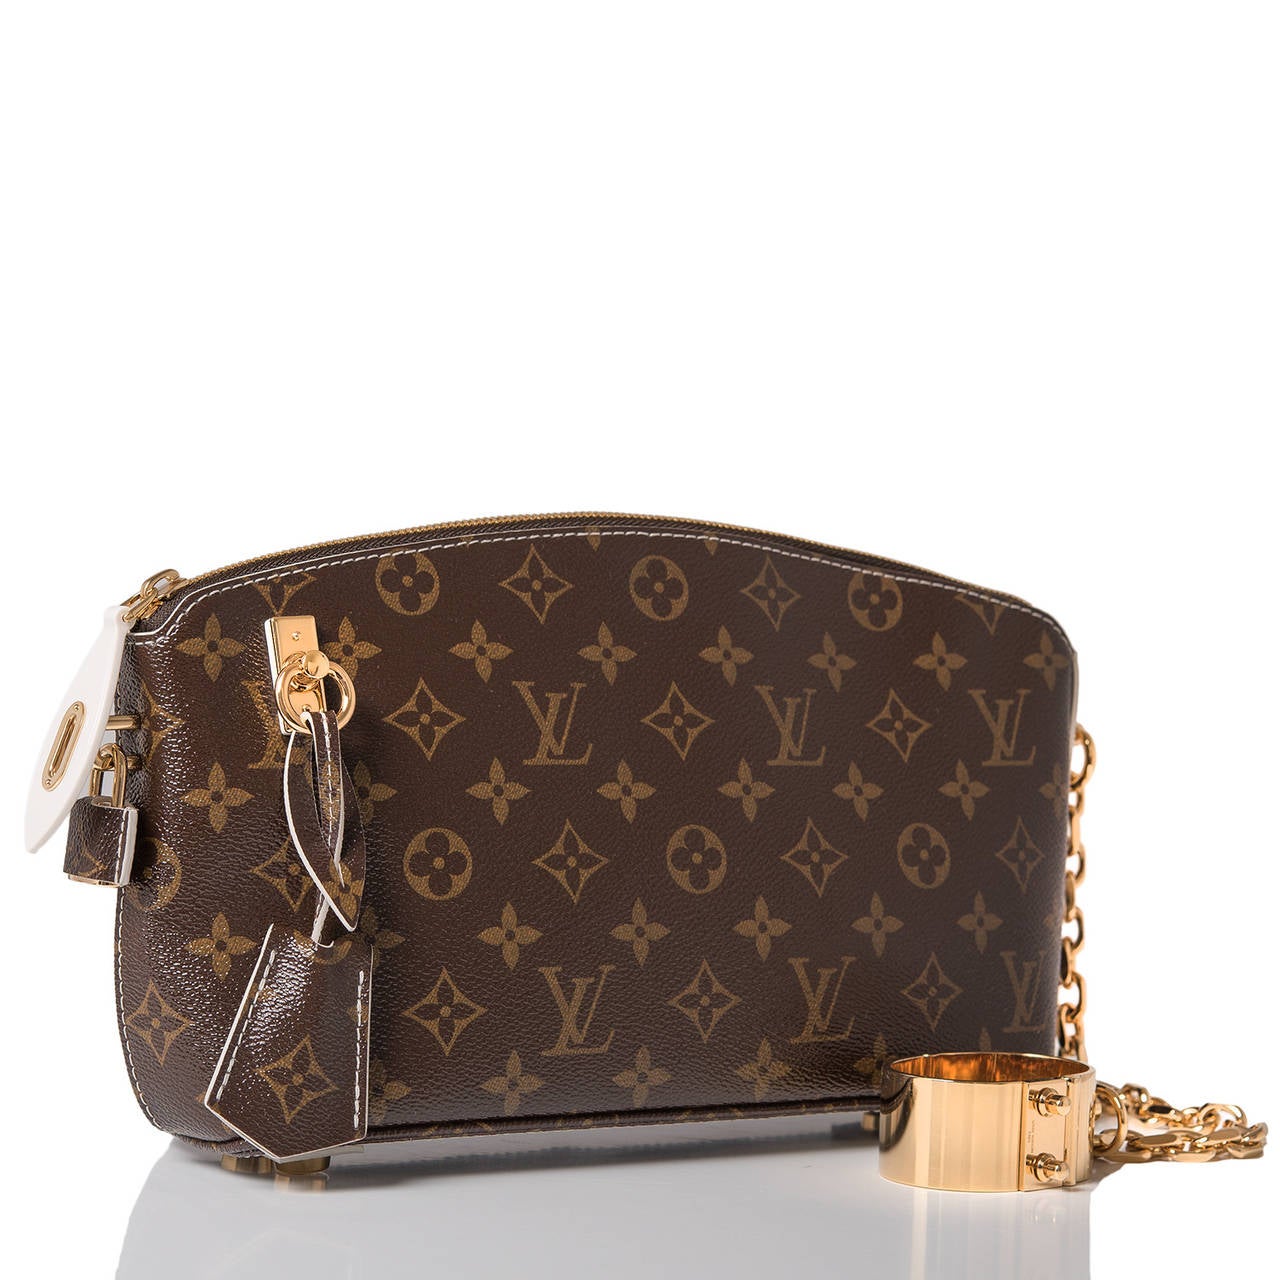 Louis Vuitton limited edition Fetish Lockit Clutch of ultra-glossy Monogram coated canvas (Fetish Canvas) and golden brass hardware.

This clutch features a removable golden brass cuff with chain, clochette and two keys, contrast ivory stitching